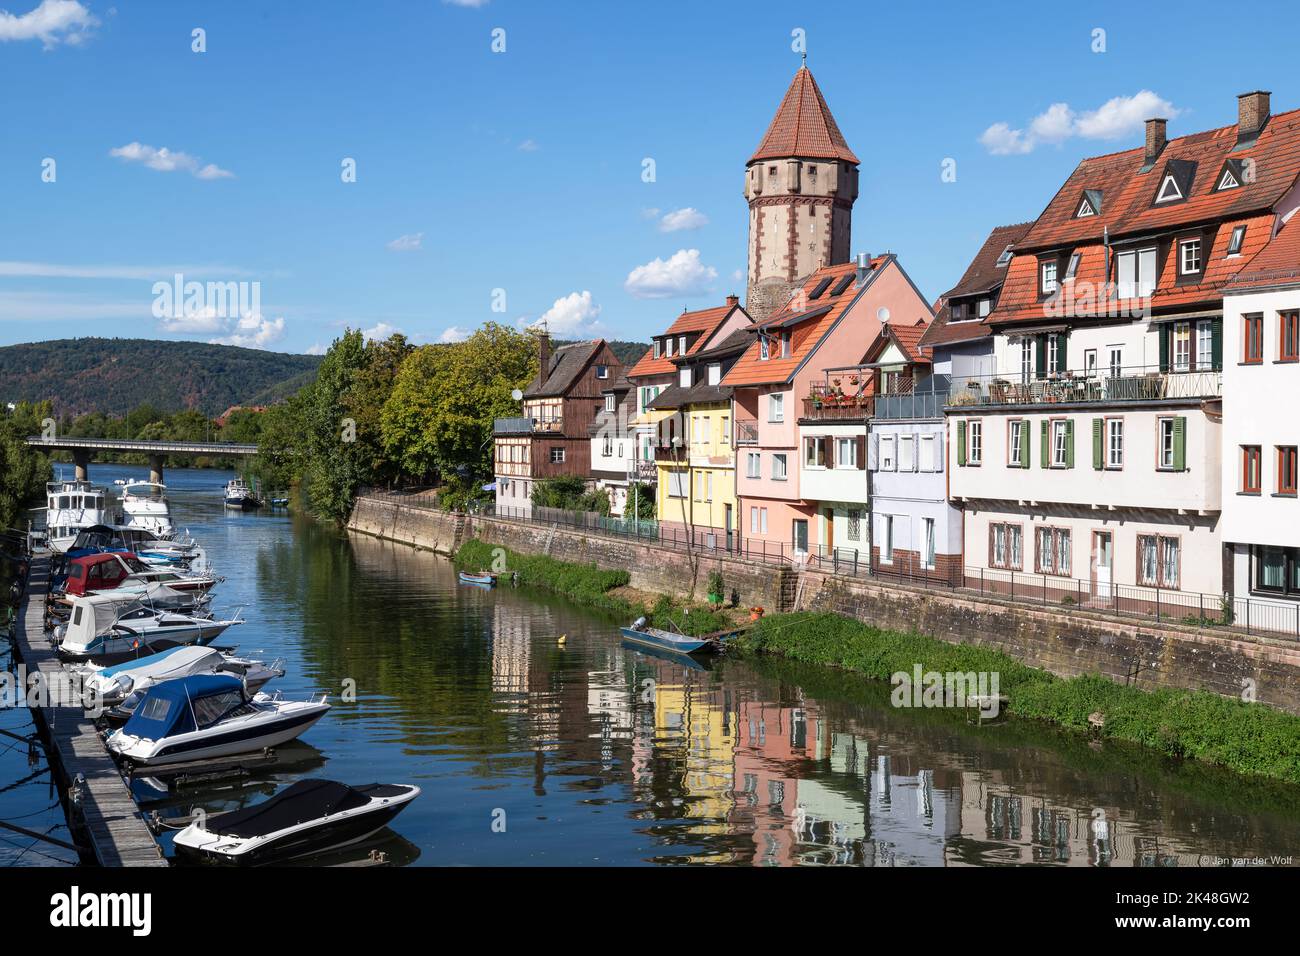 Monumental old watchtower along the river Tauber in the small town of Wertheim am Main, Germany. Stock Photo